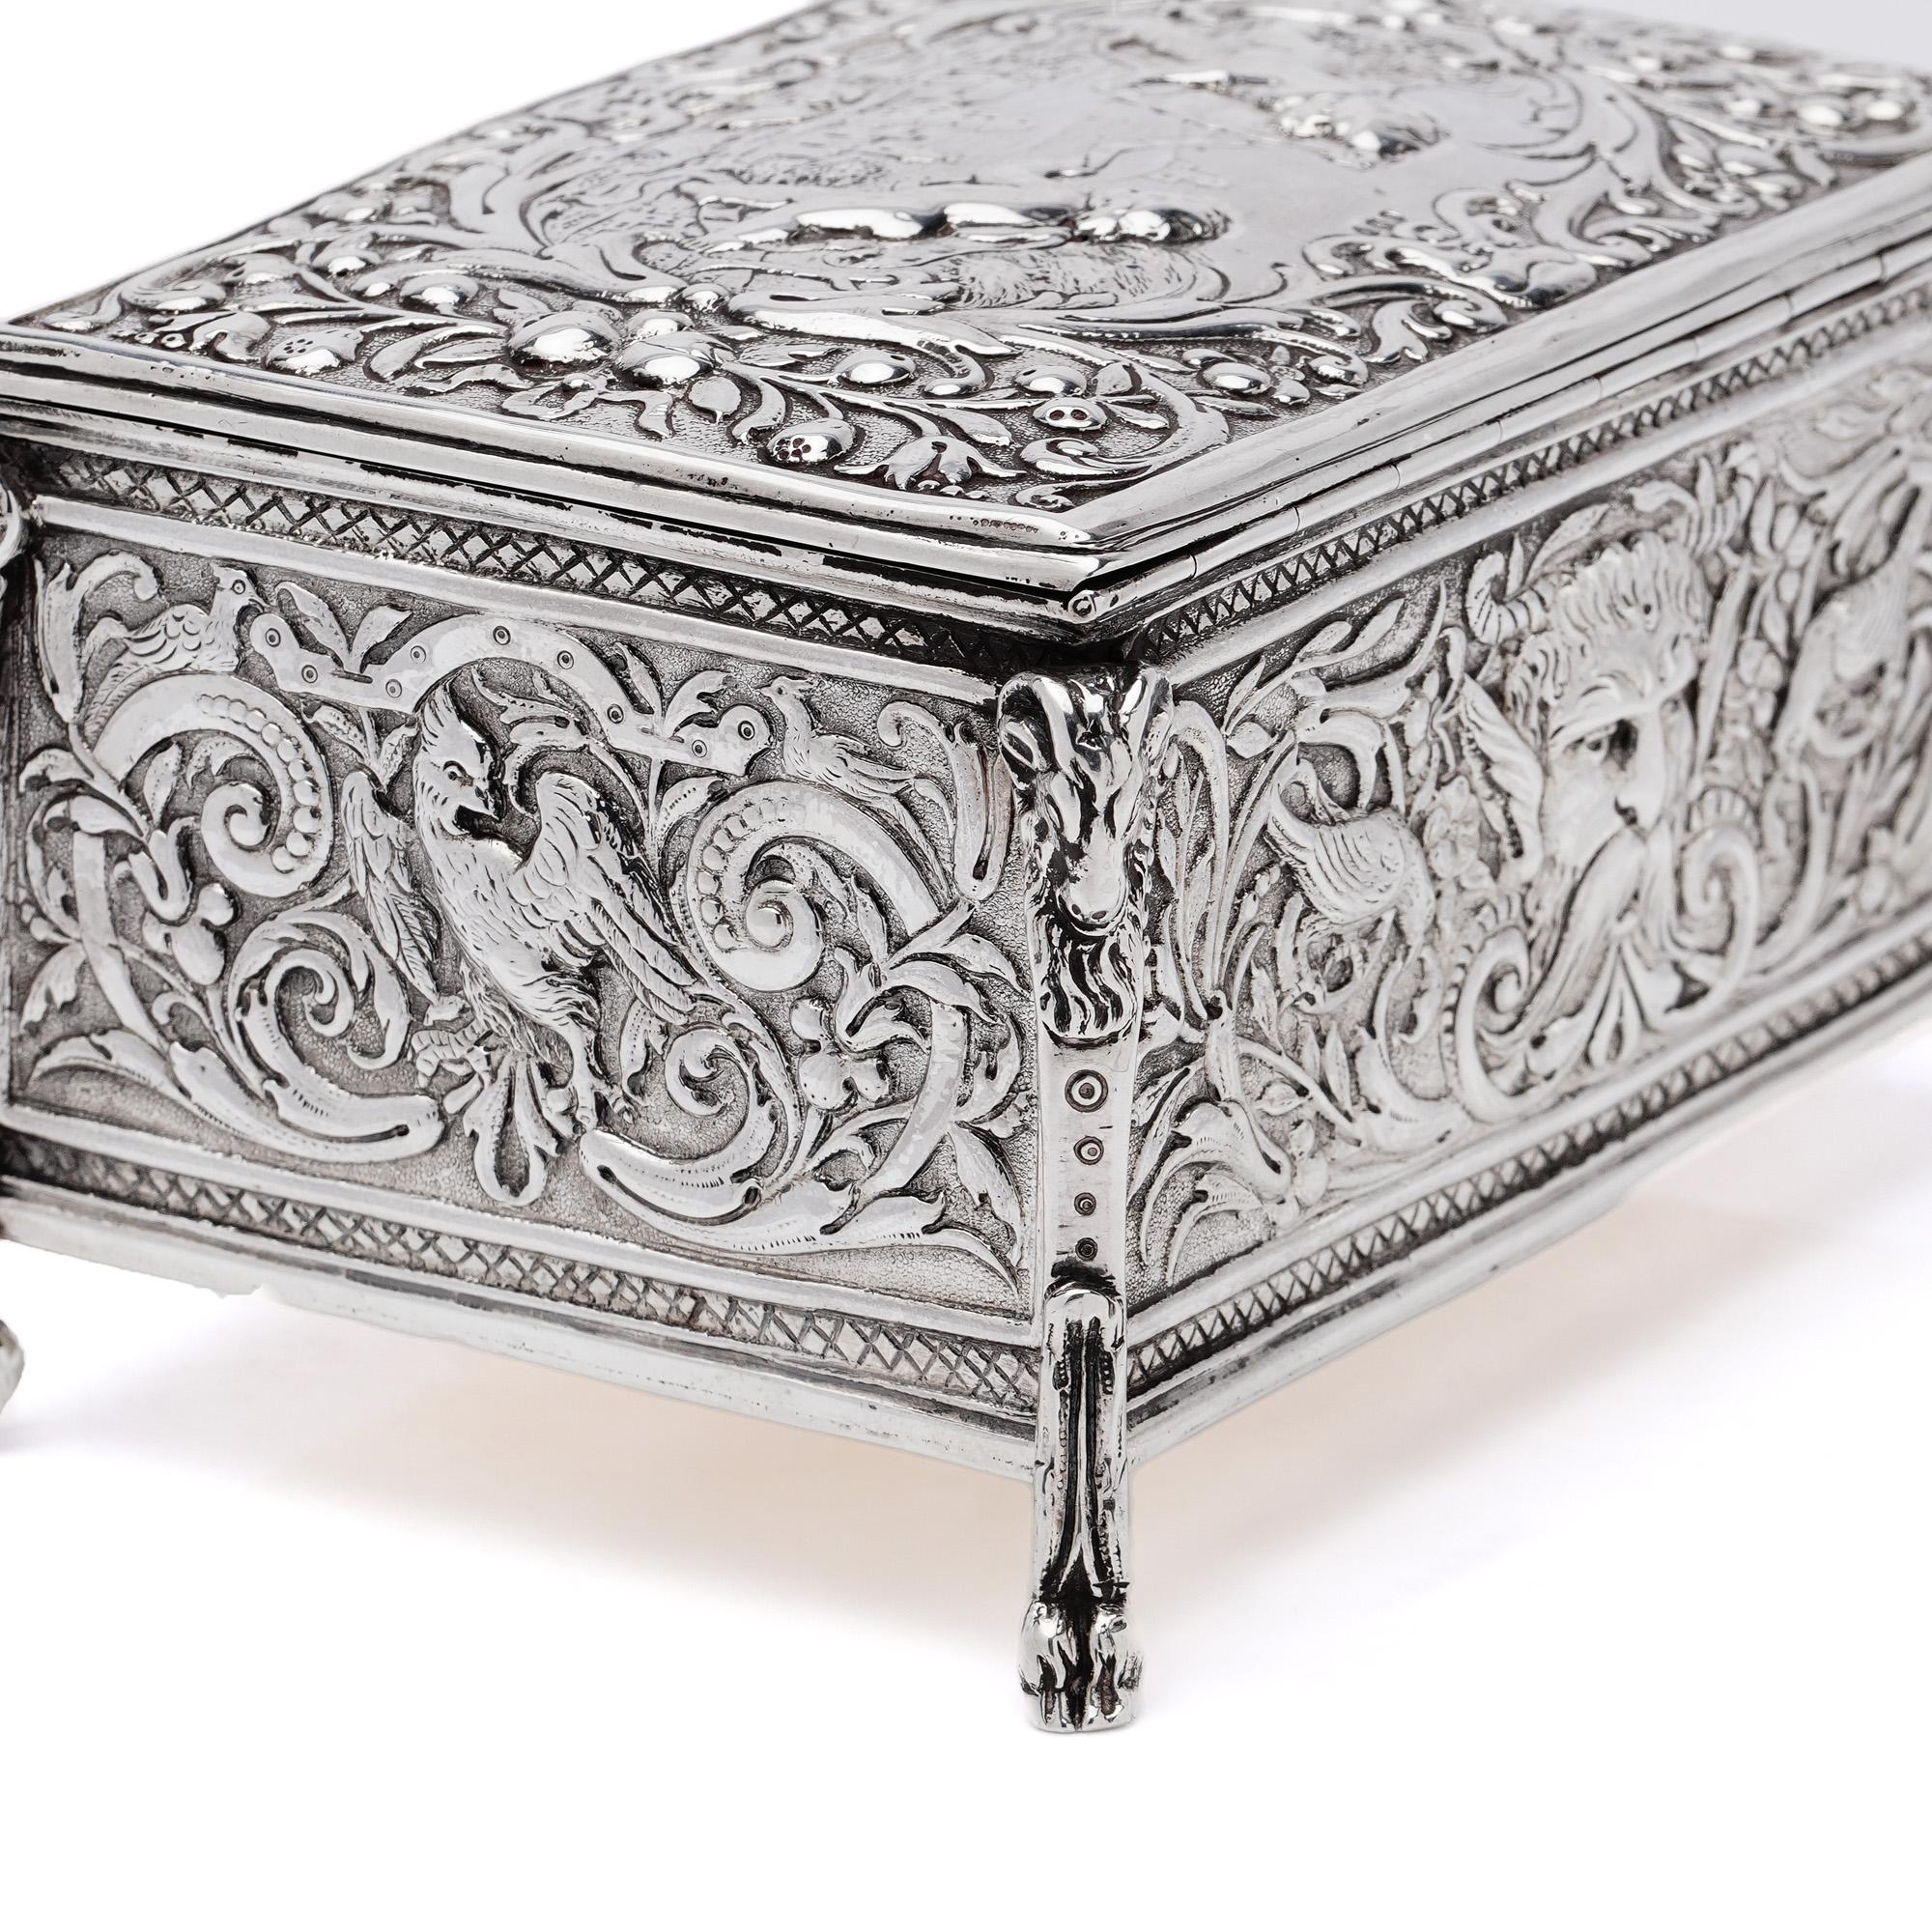 Antique Late 19th Century Silver Repoussé Decorated Jewellery Box with Cherubs For Sale 4